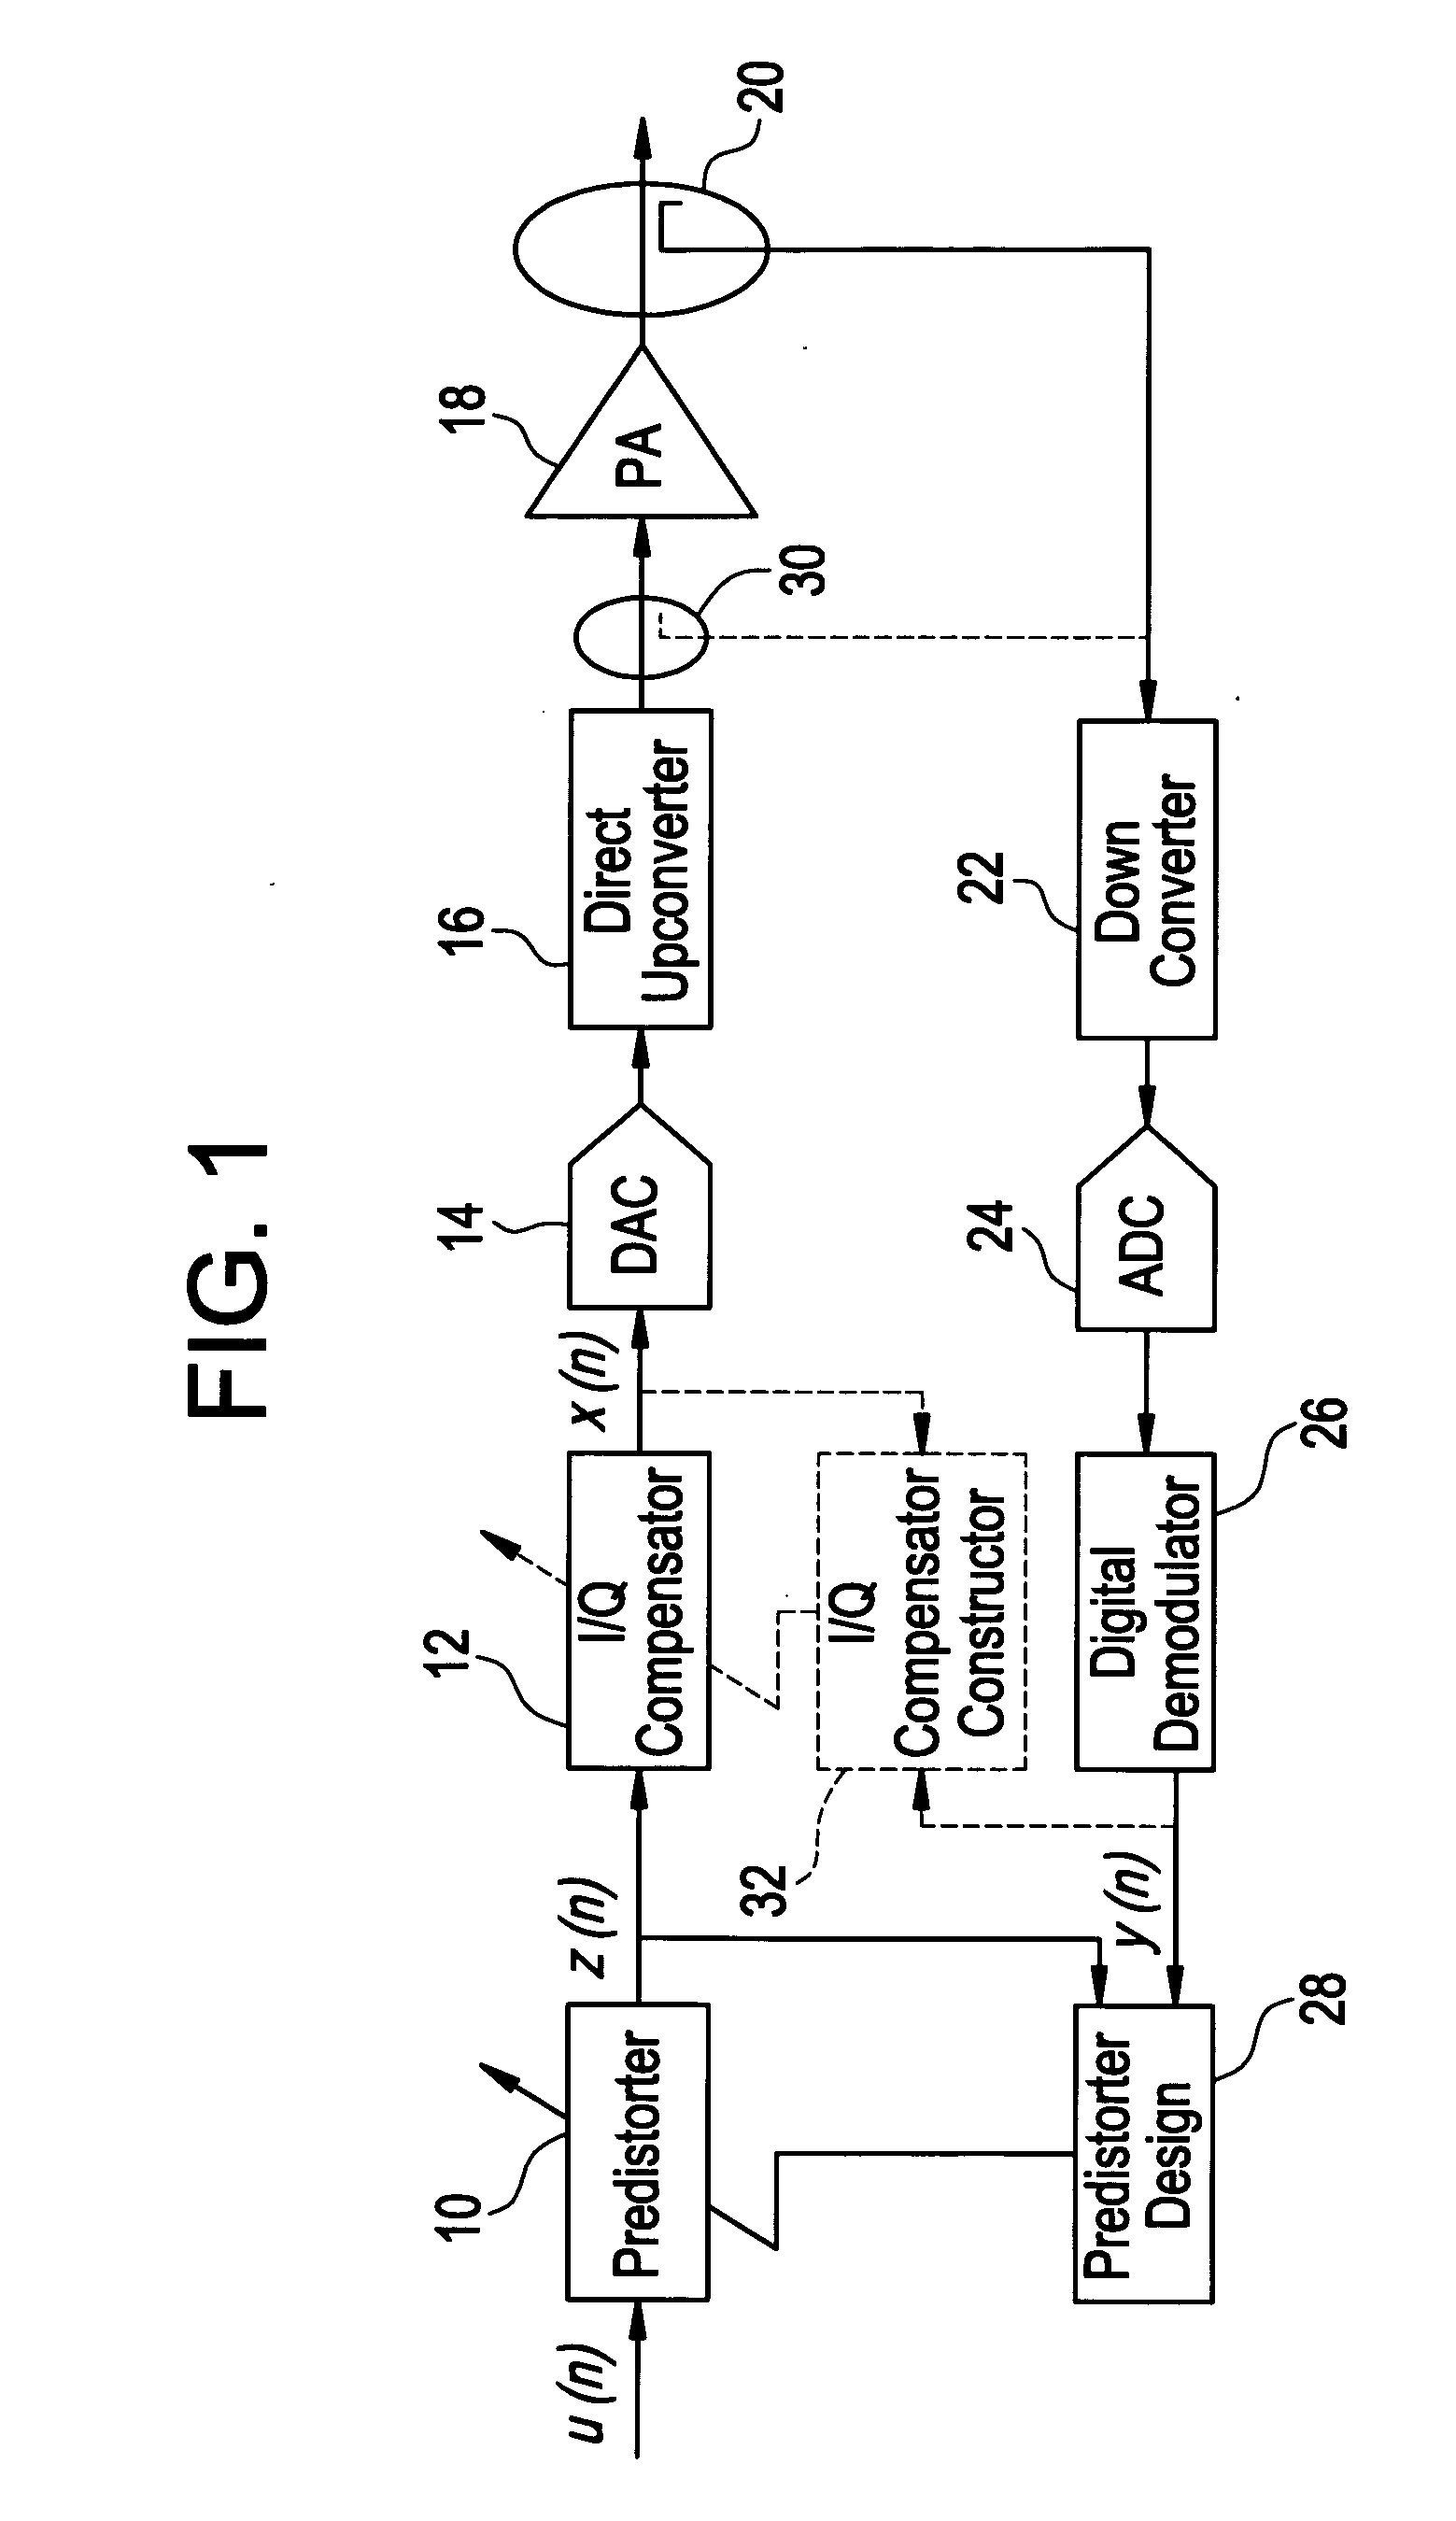 Frequency based modulator compensation